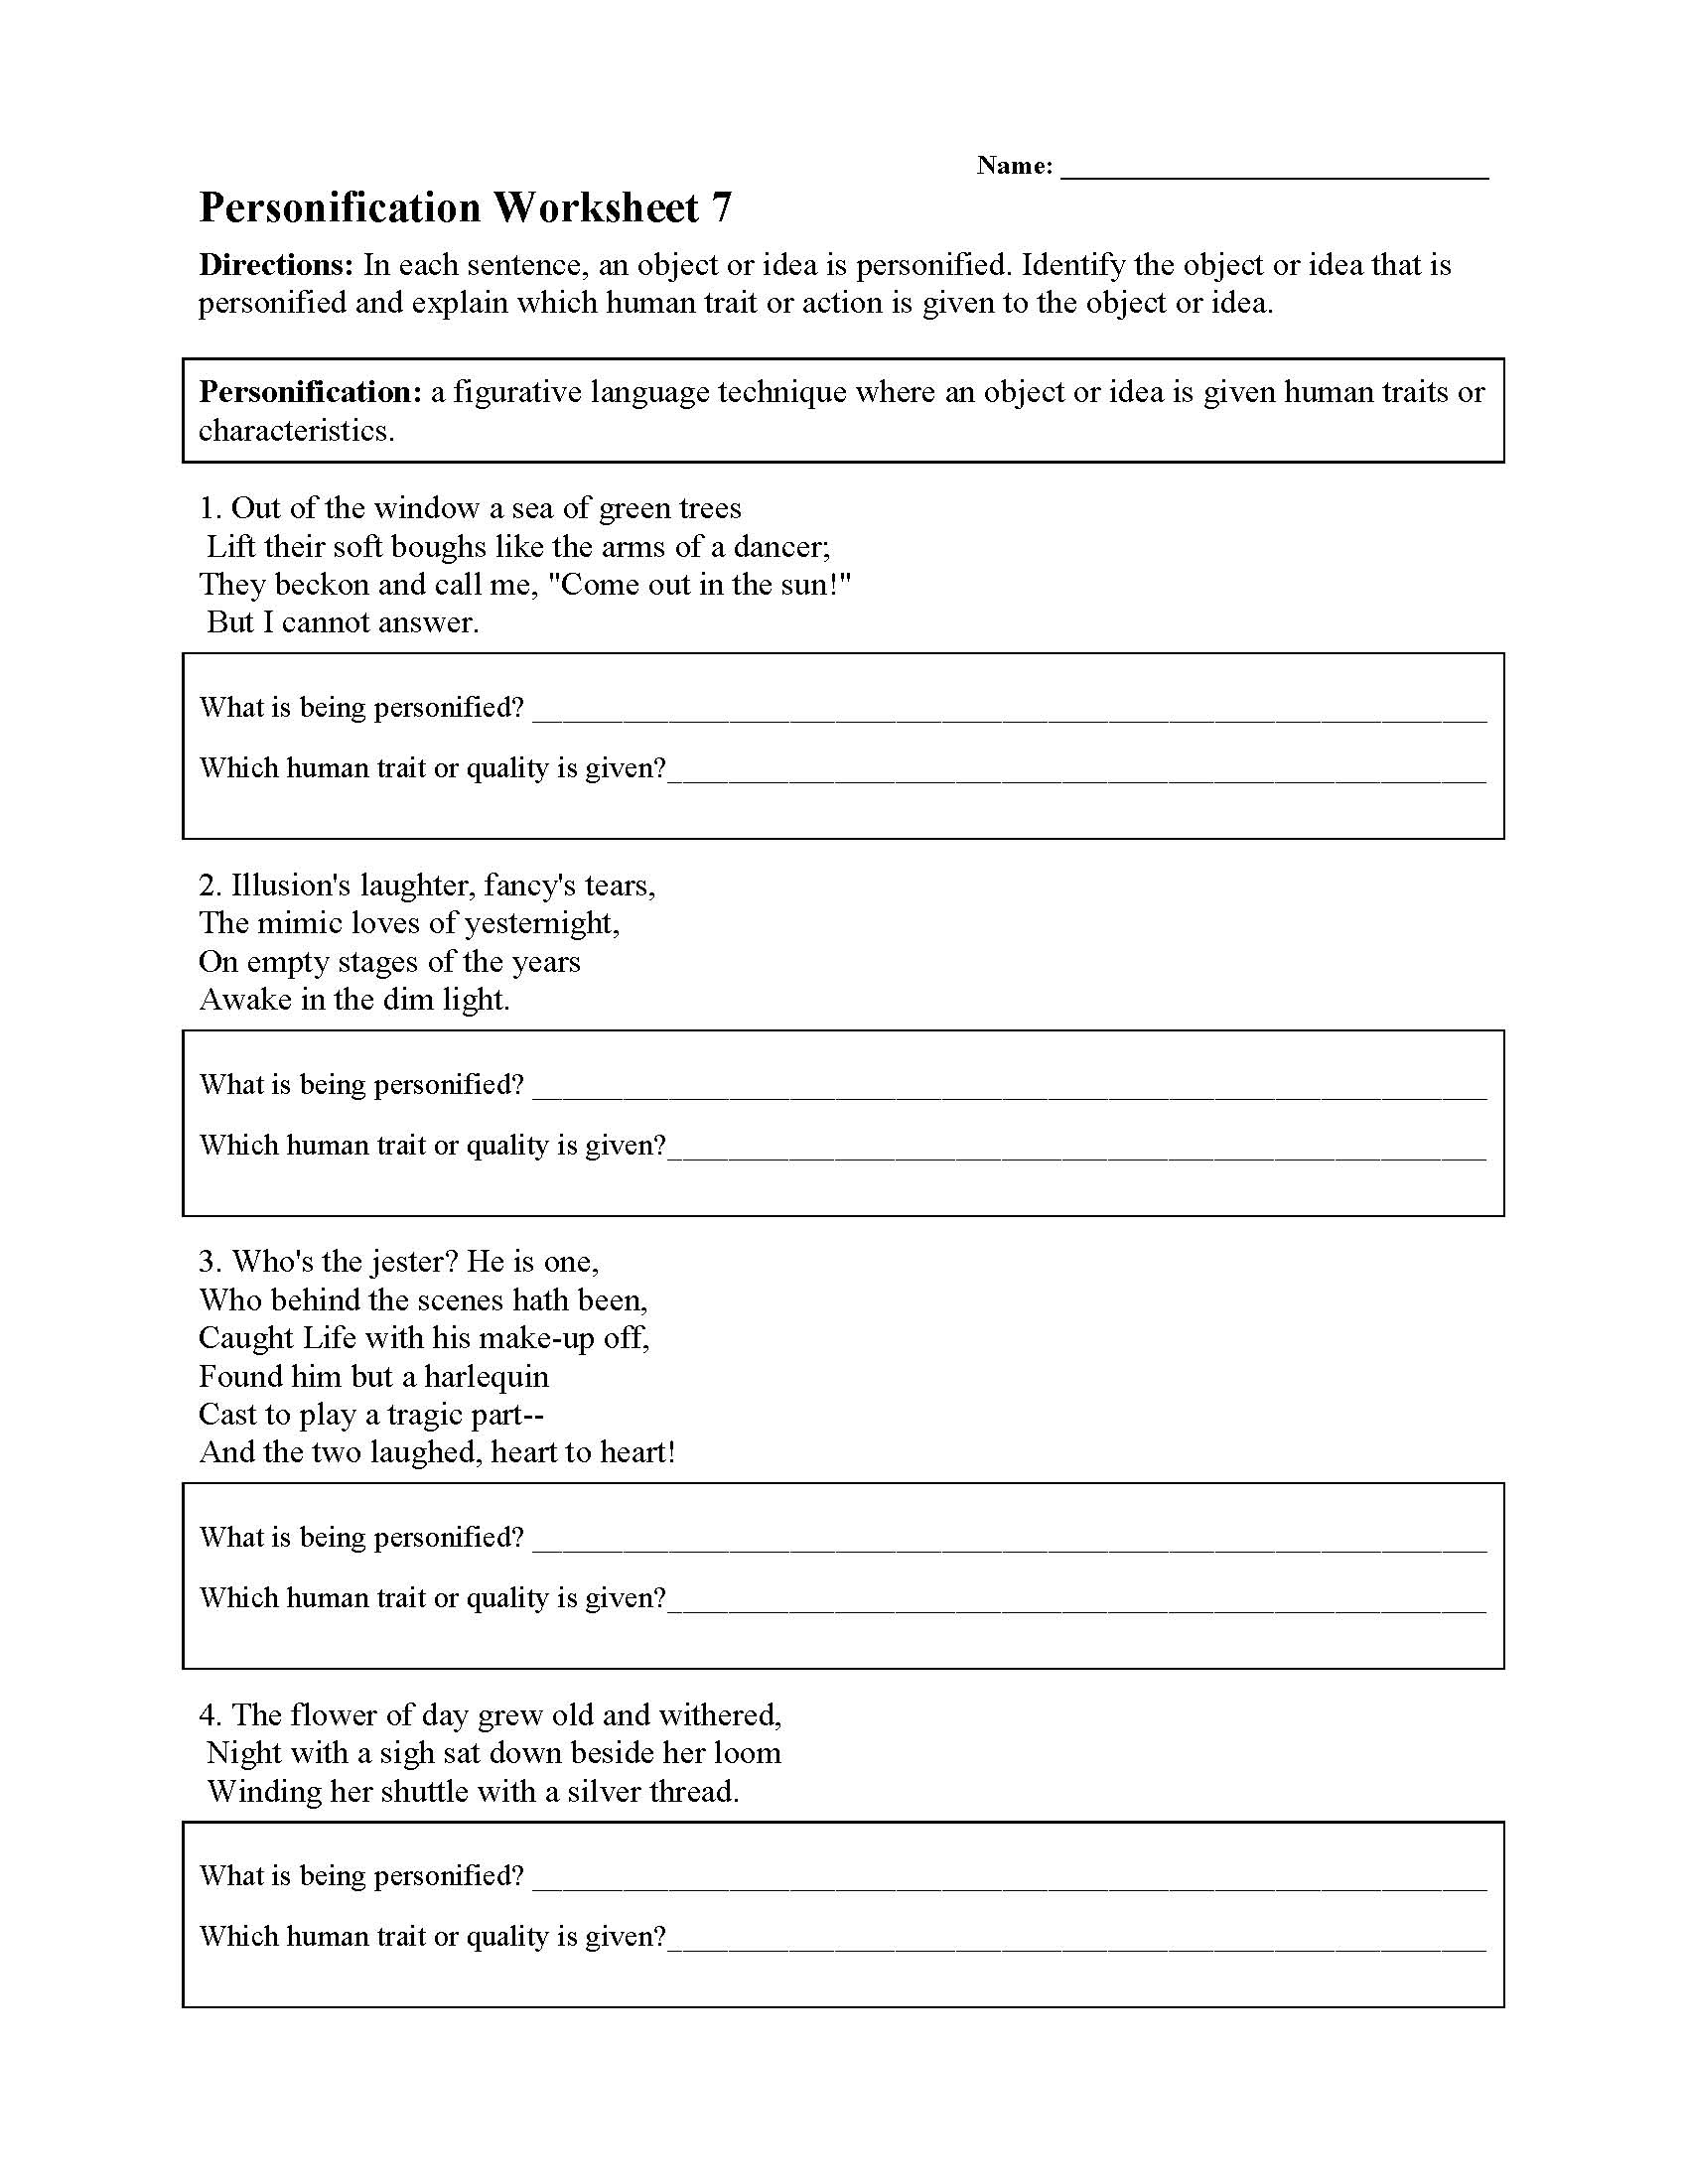 free-printable-personification-worksheets-printable-form-templates